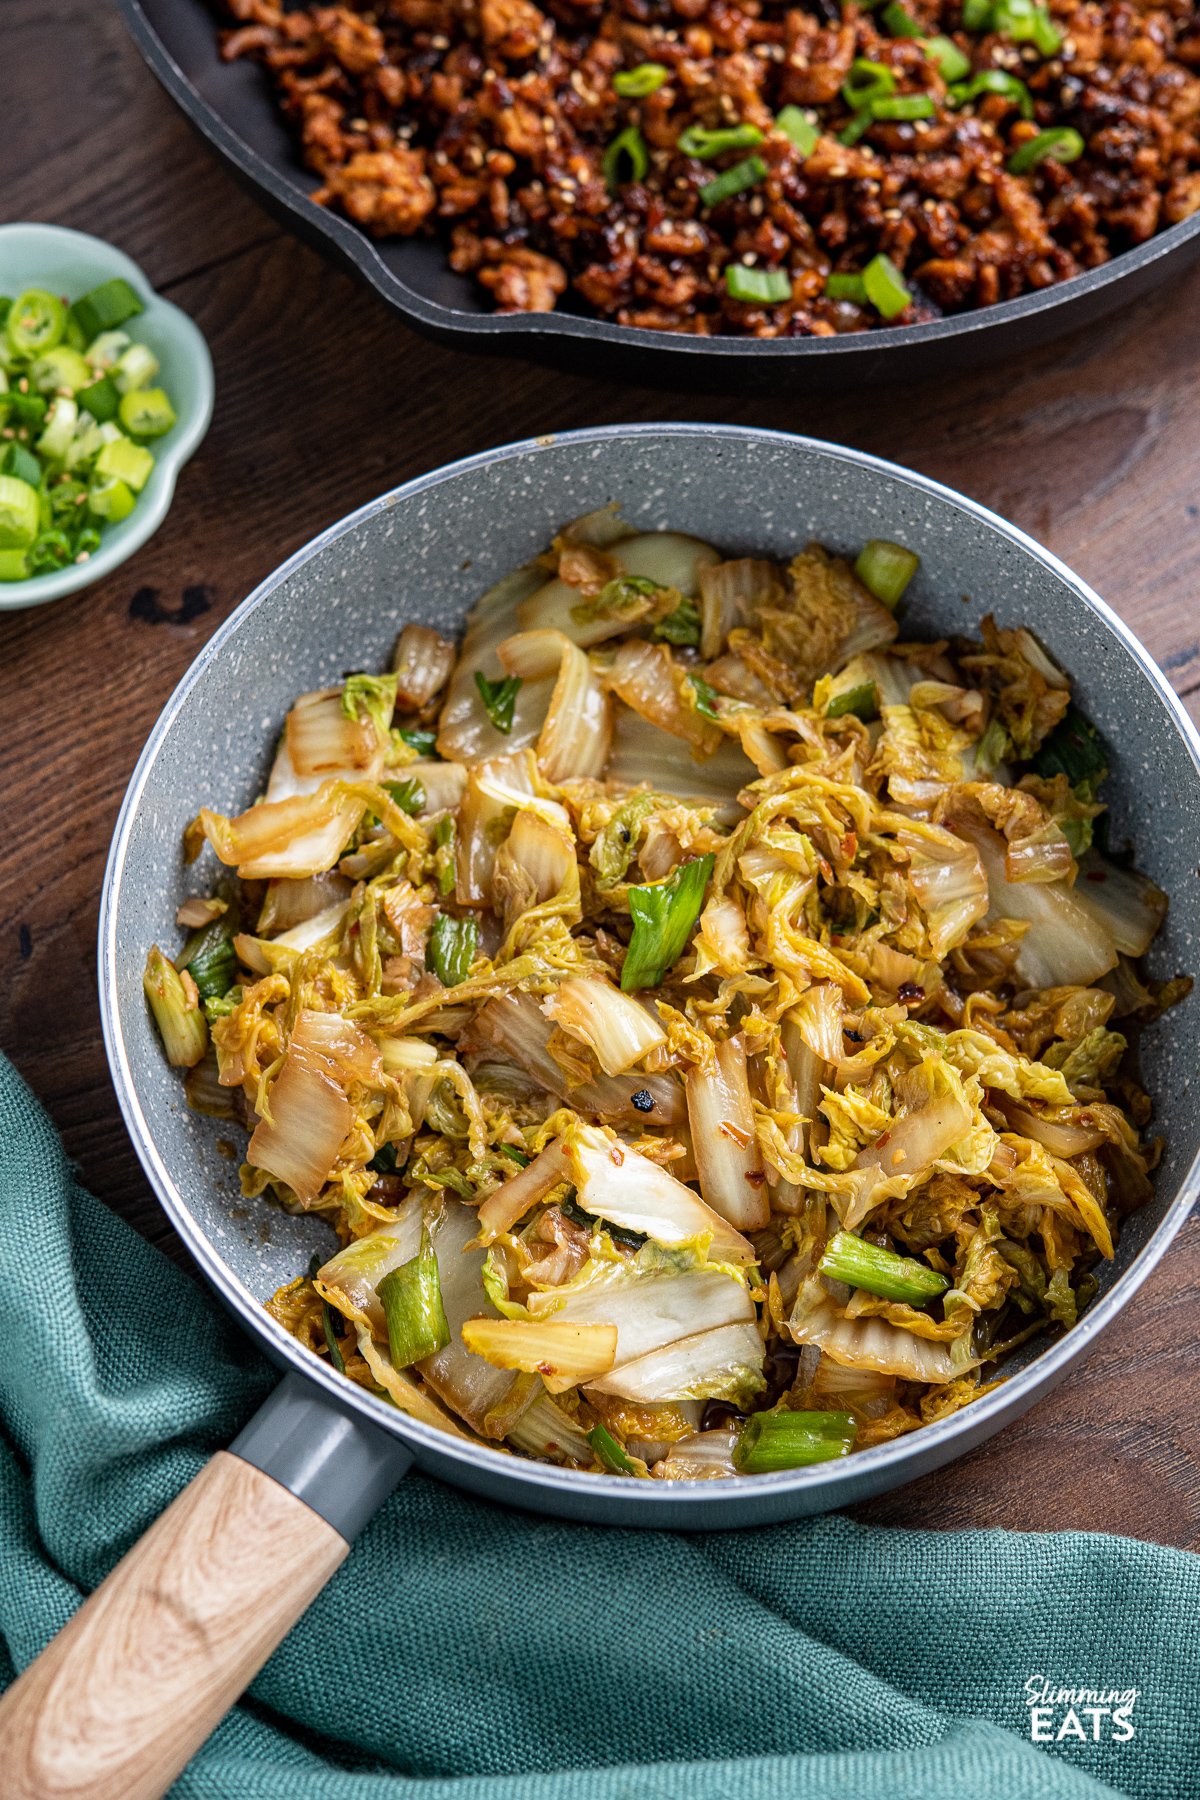 Spicy Garlic Napa Cabbage in grey frying pan with wooden handle, pan of Korean ground pork in background